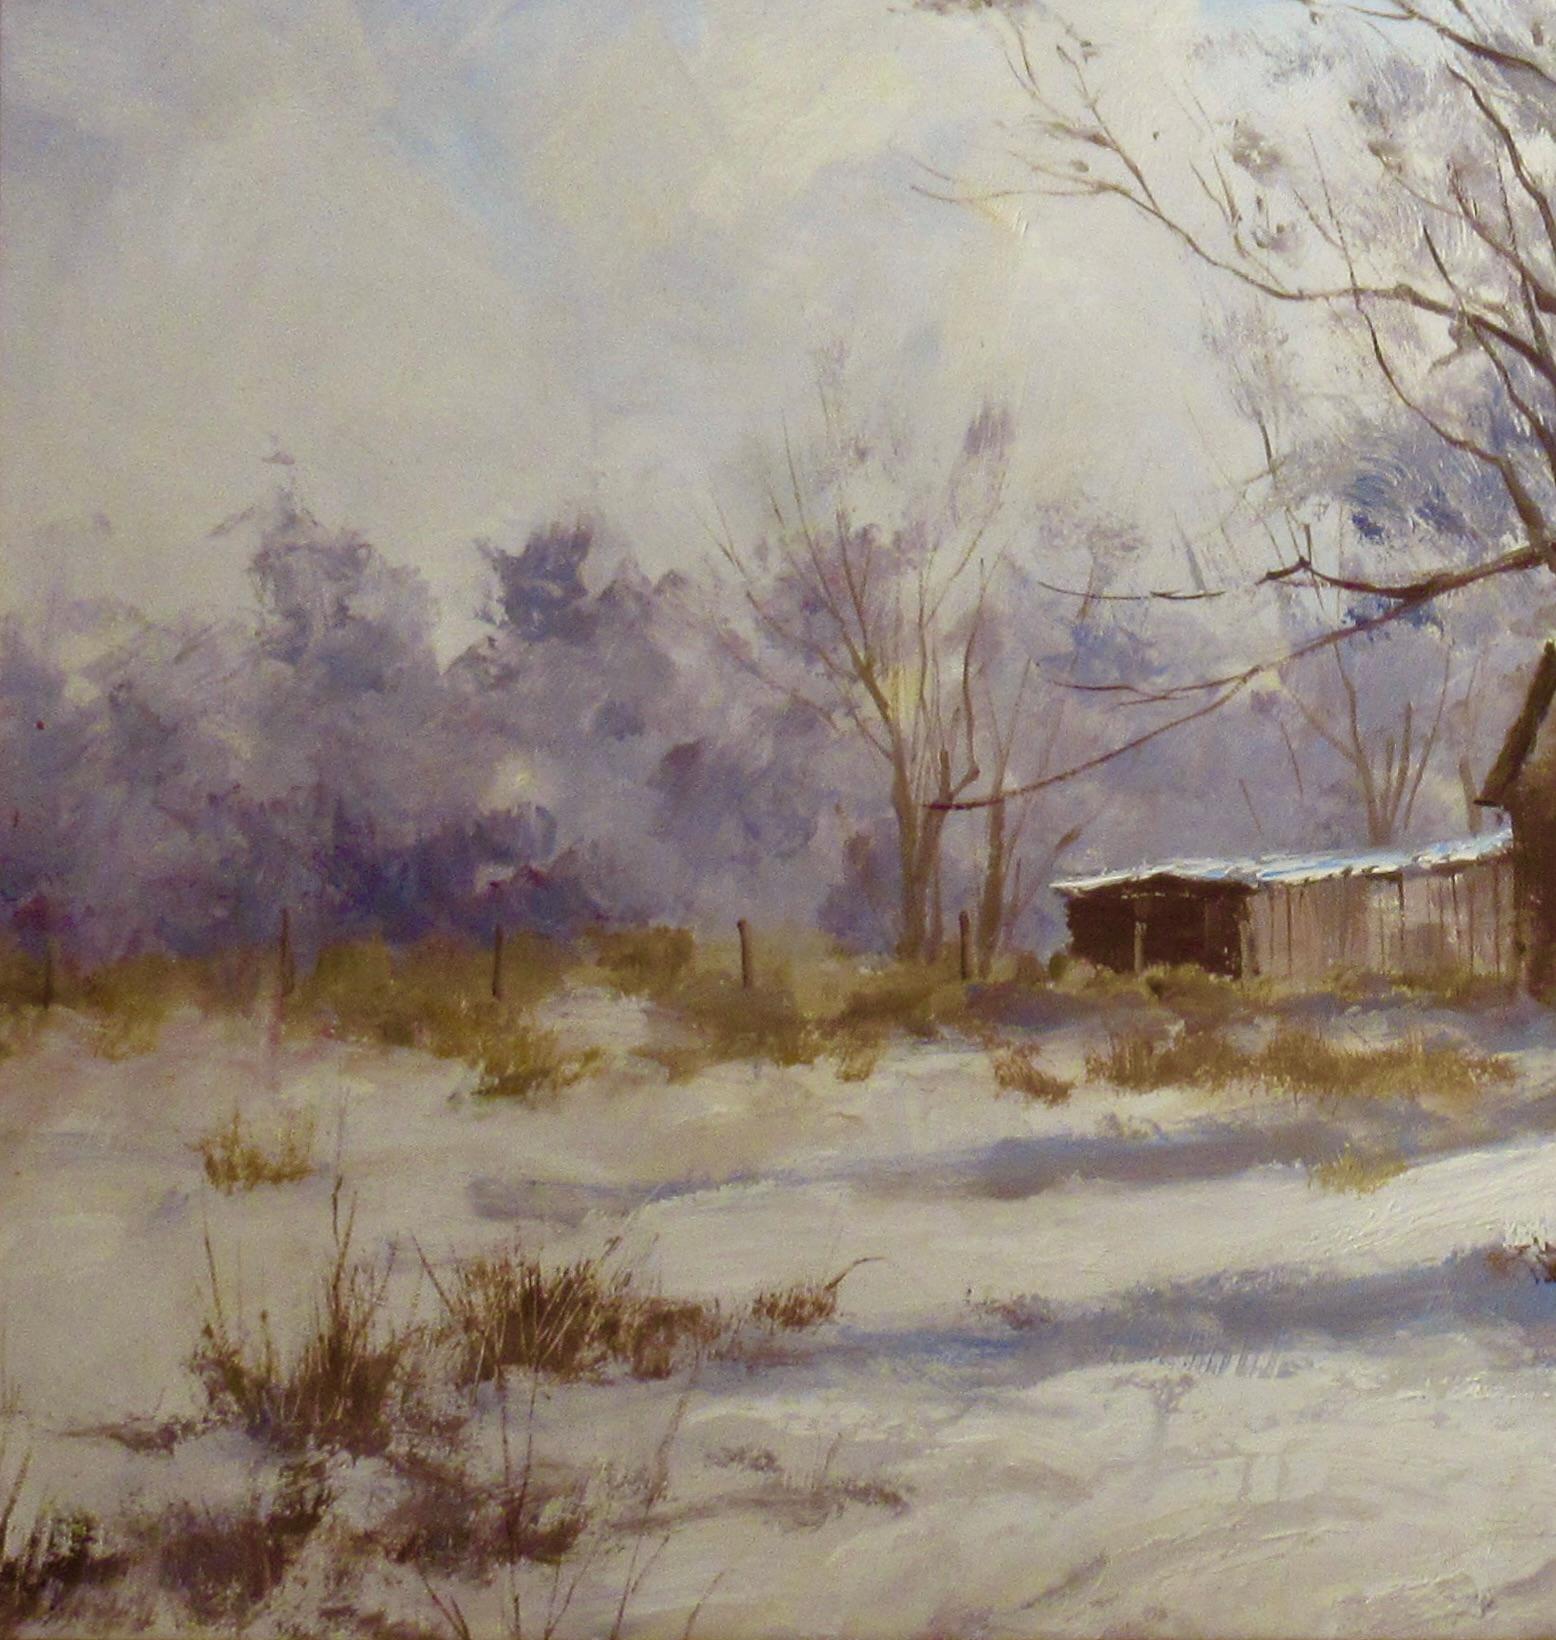 Landscape with Snow - American Impressionist Painting by Robert Wee